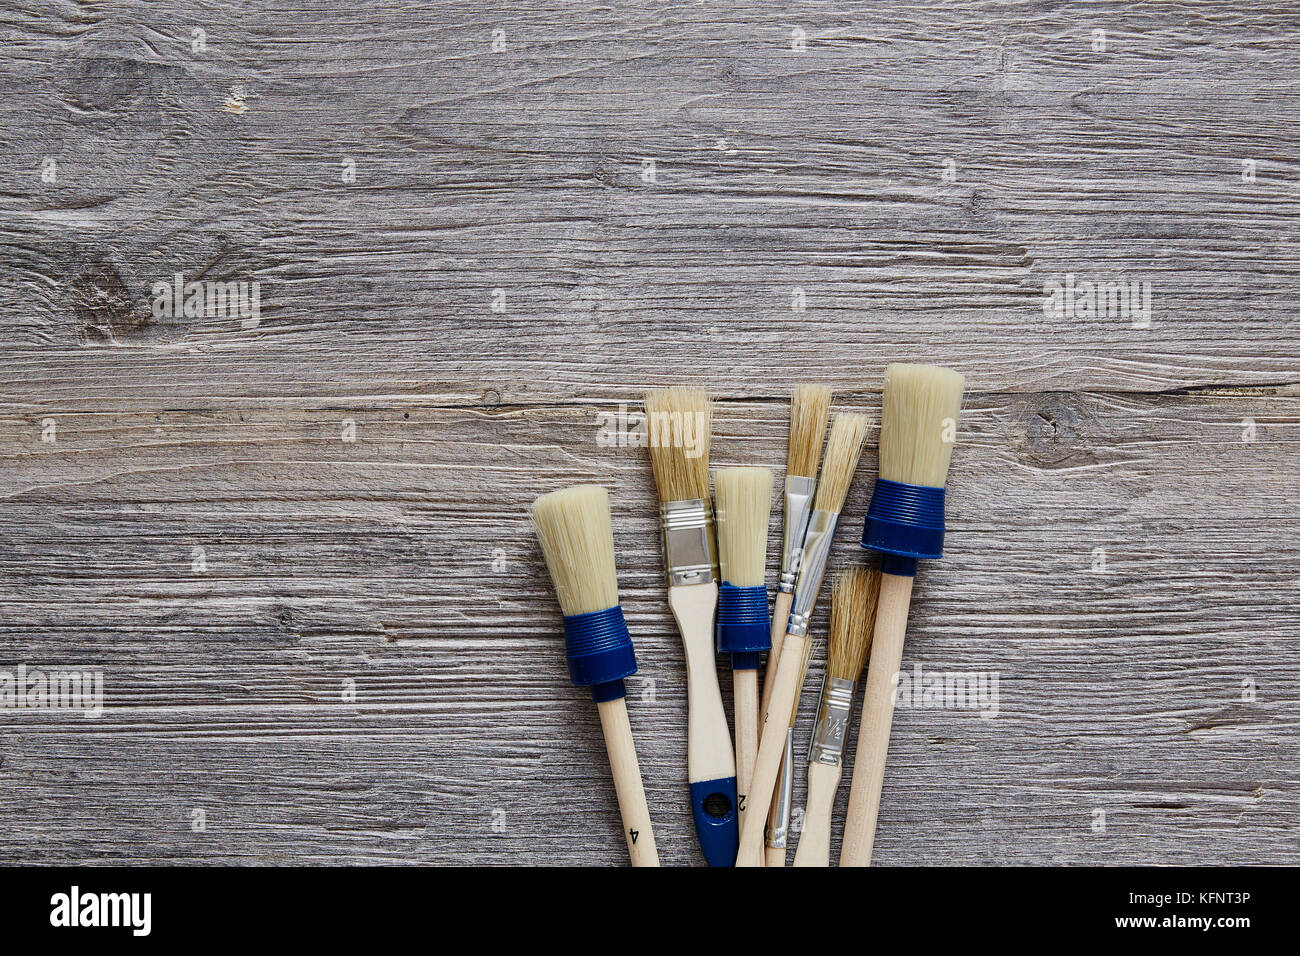 three paintbrushes unorganised on raw wooden table Stock Photo